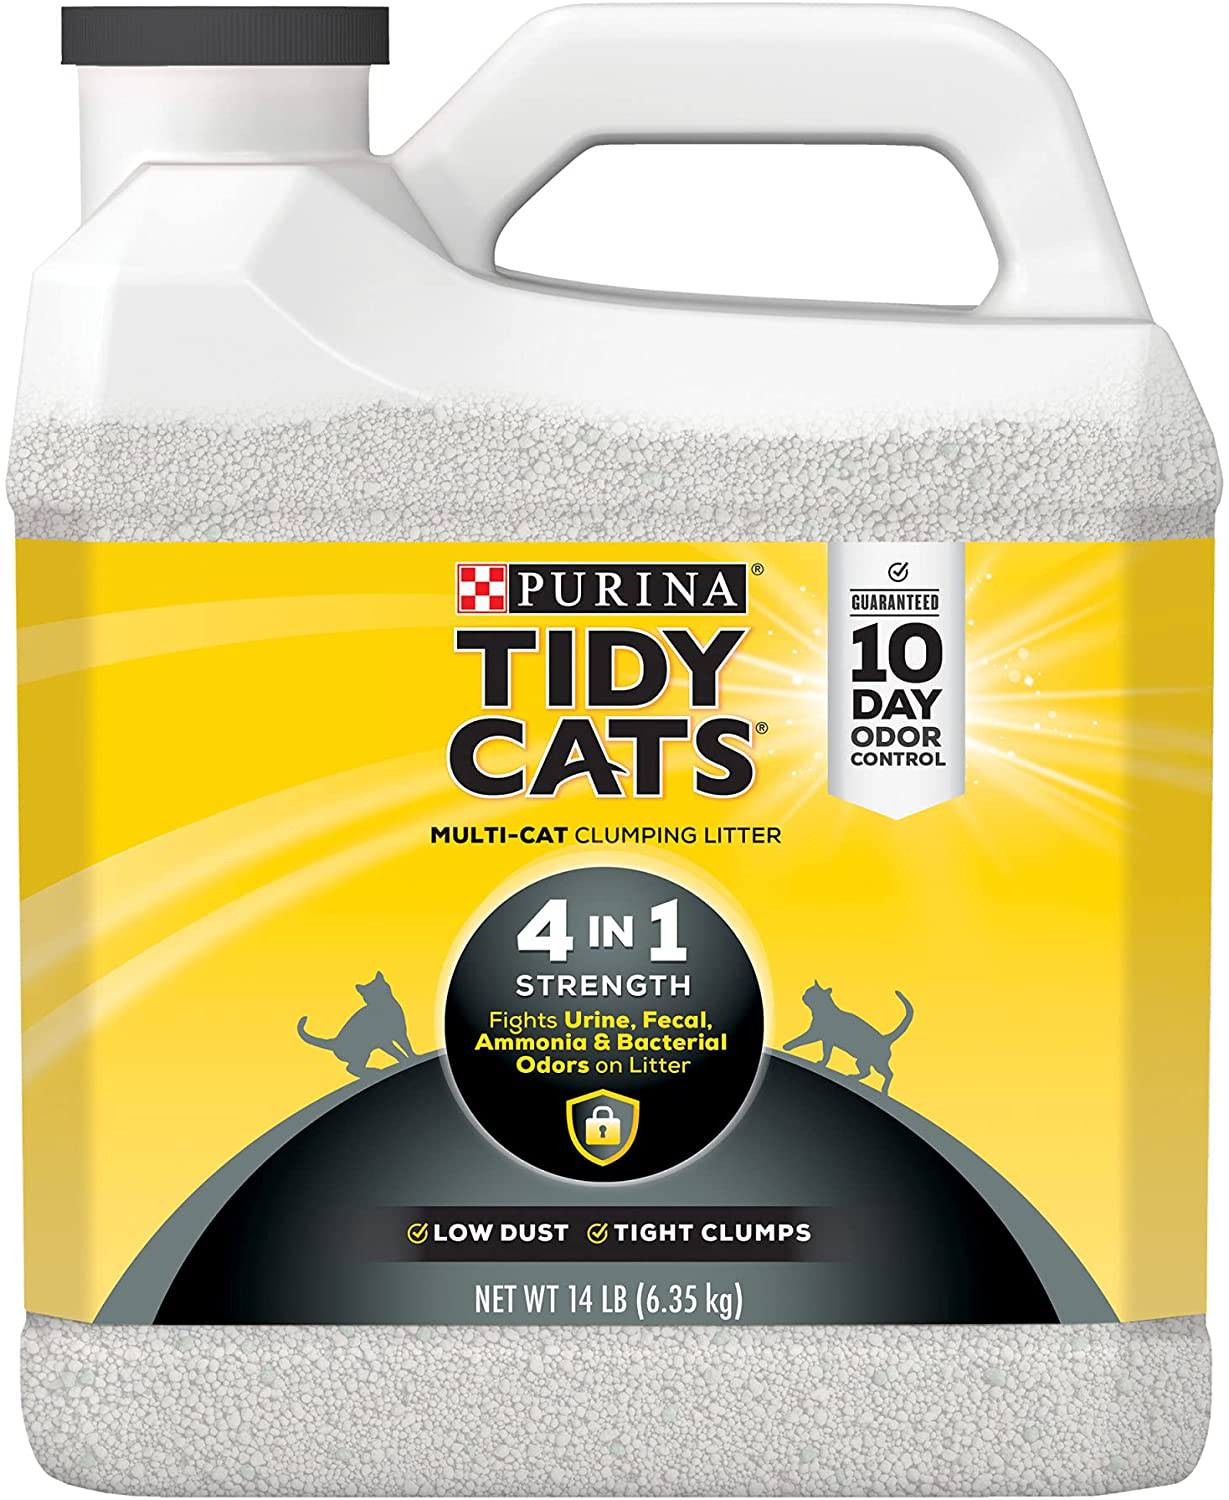 Purina Tidy Cats 4-In-1 Strength Clumping Cat Litter